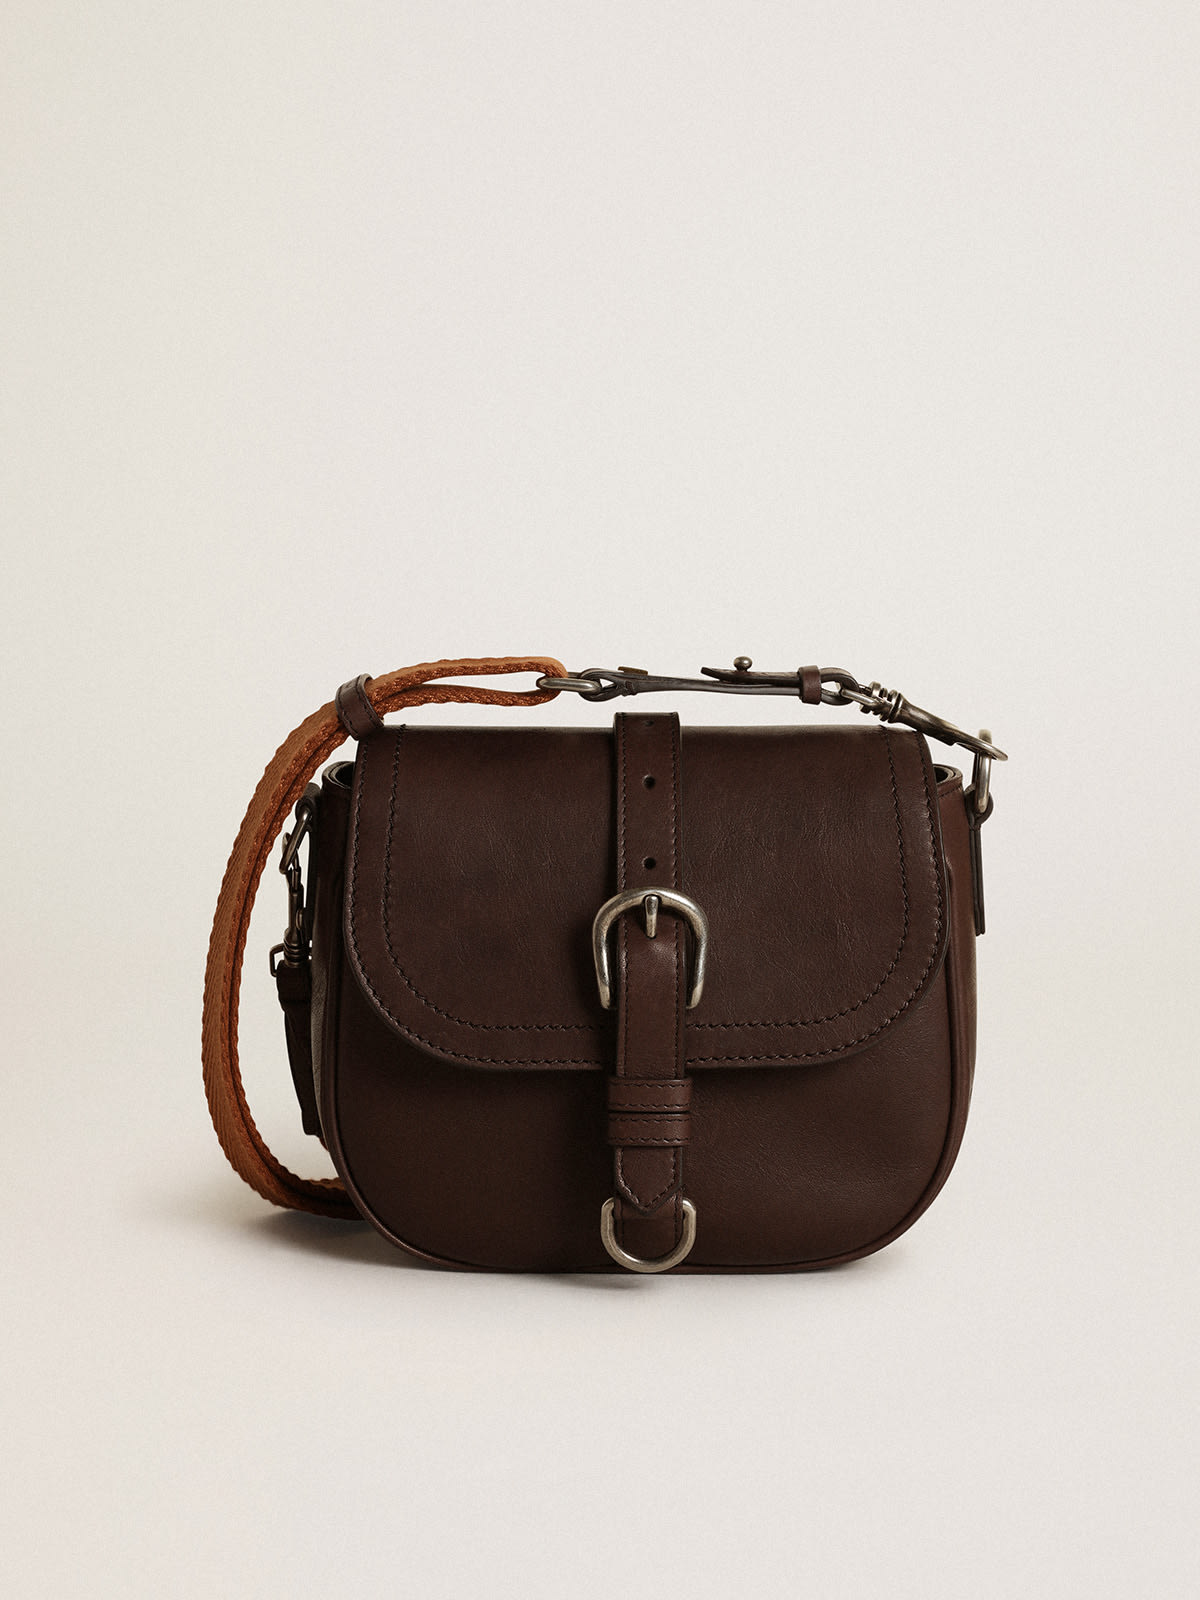 Golden Goose - Small Sally Bag in dark brown leather with contrasting buckle and shoulder strap in 